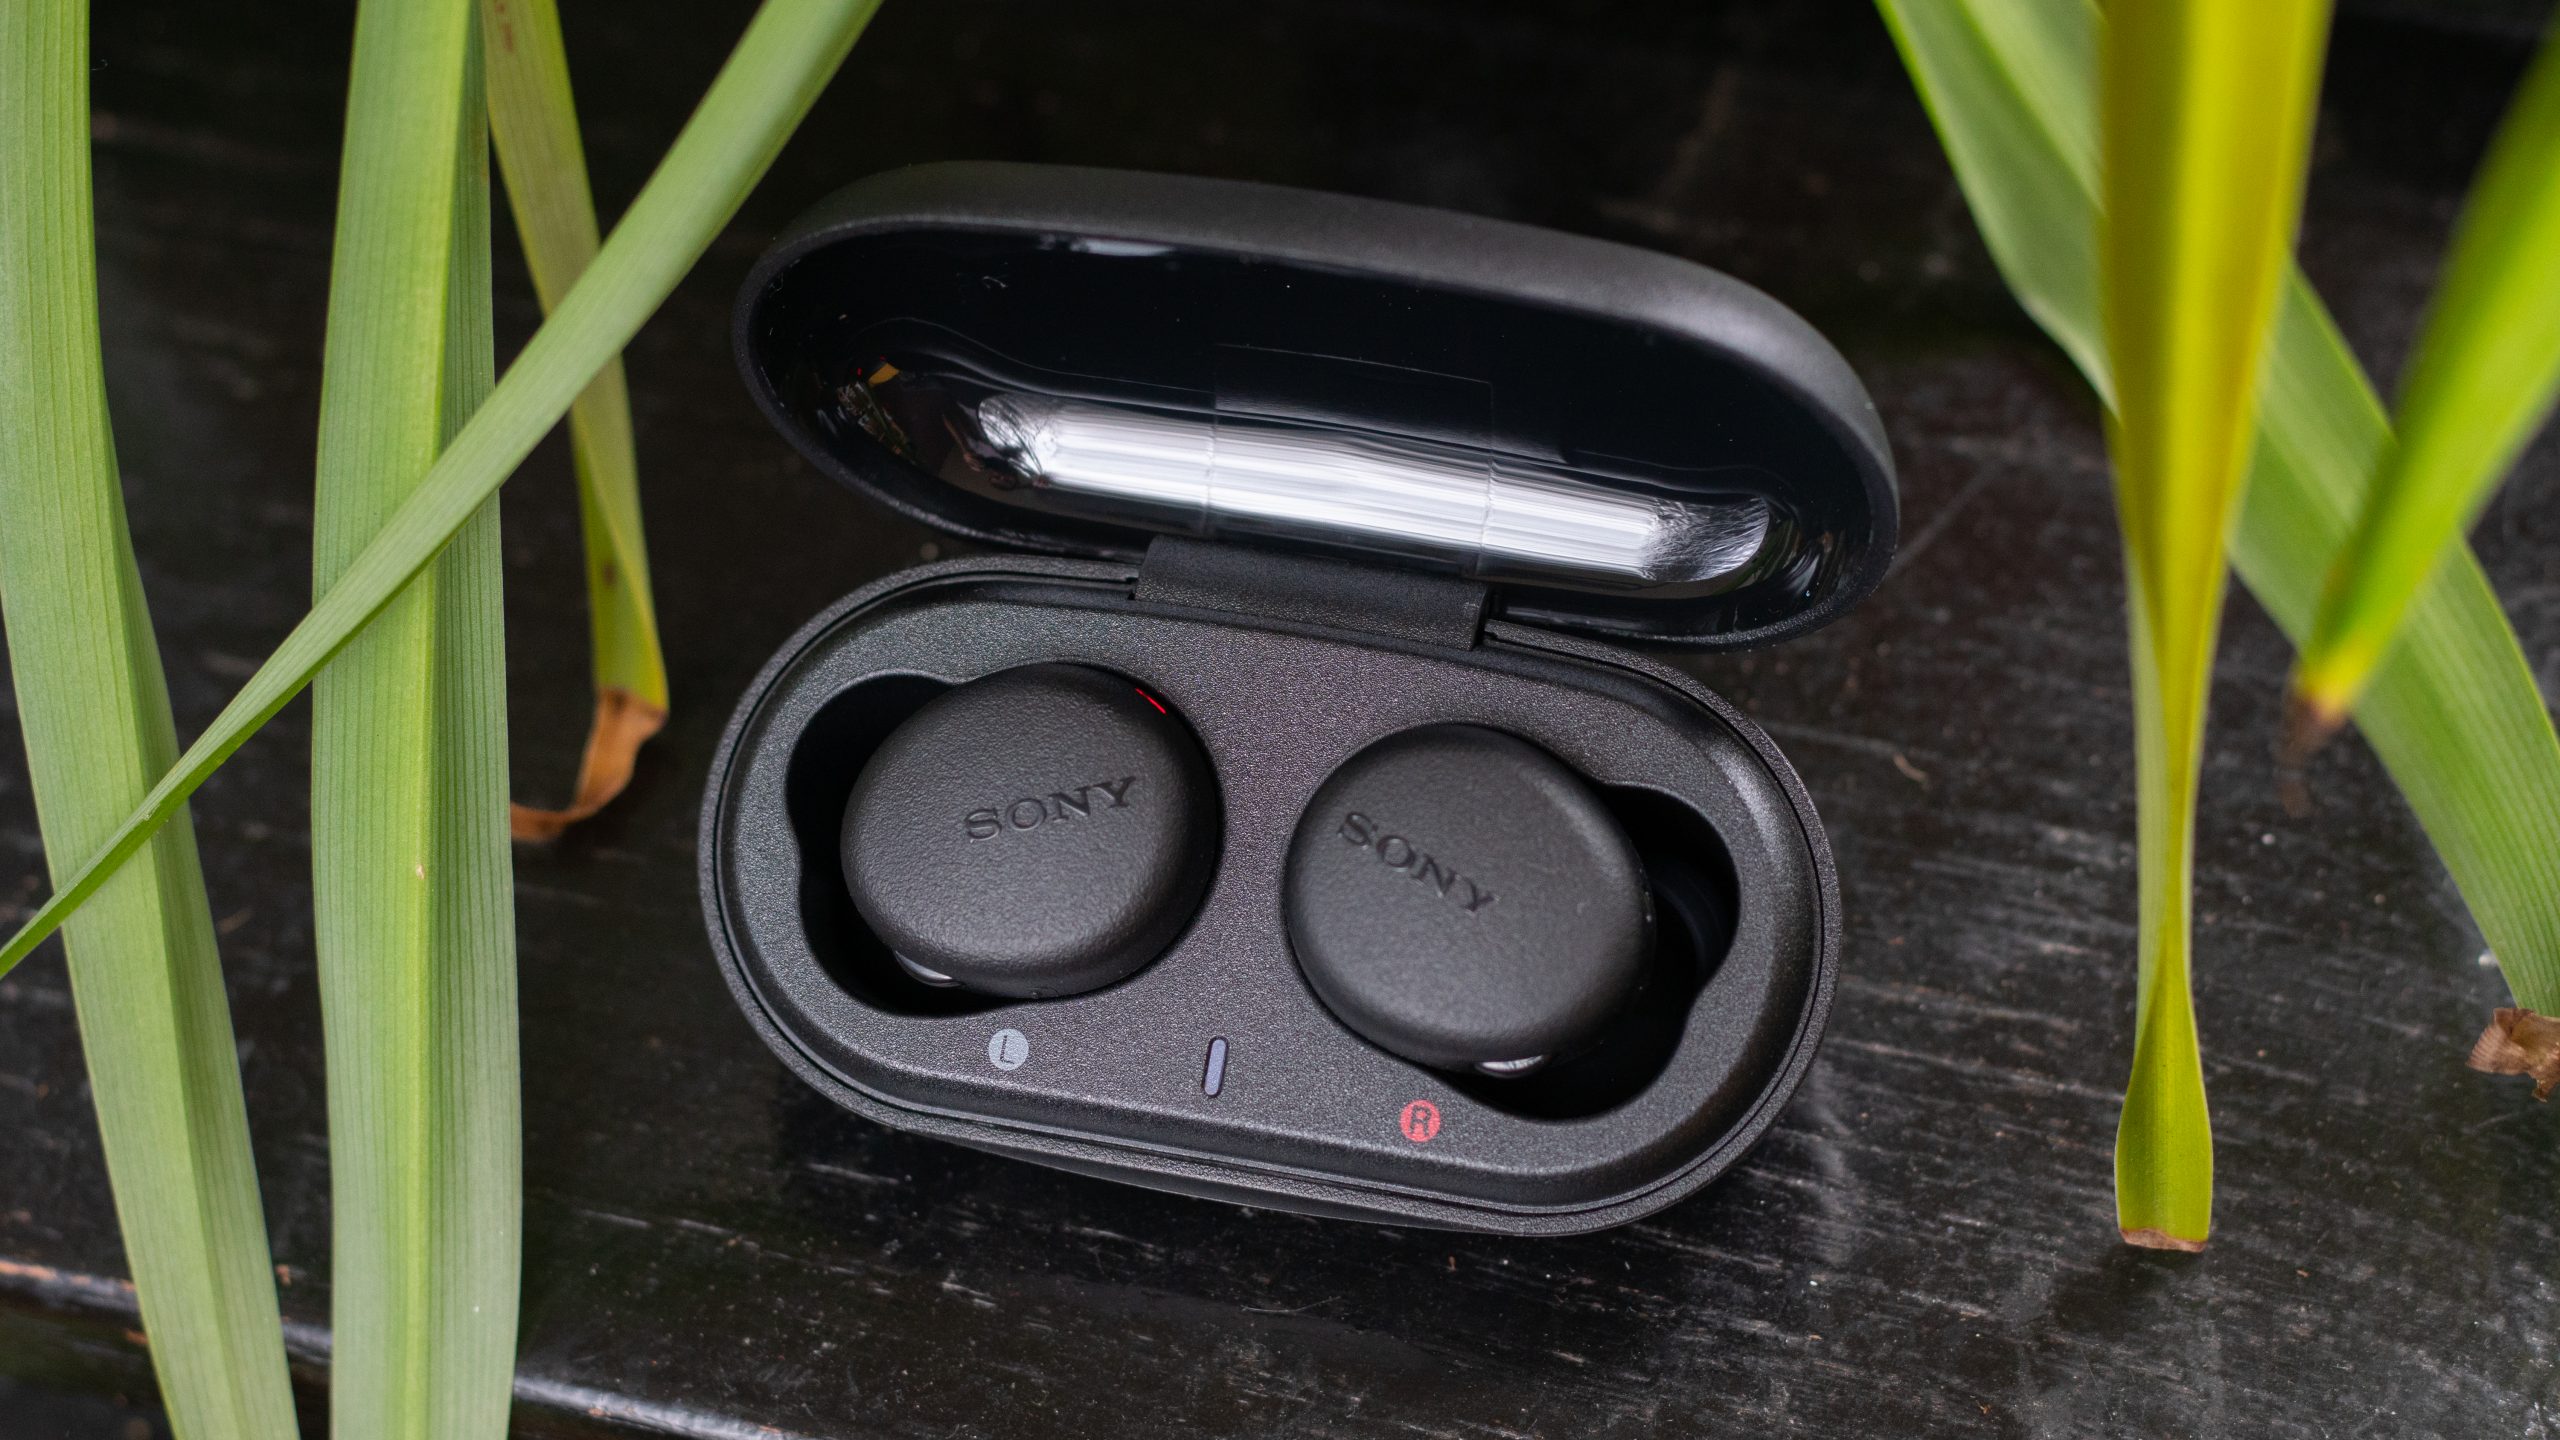 Sony WF-XB700 earbuds in the charging case with the lid open on a black table with plants in the foreground